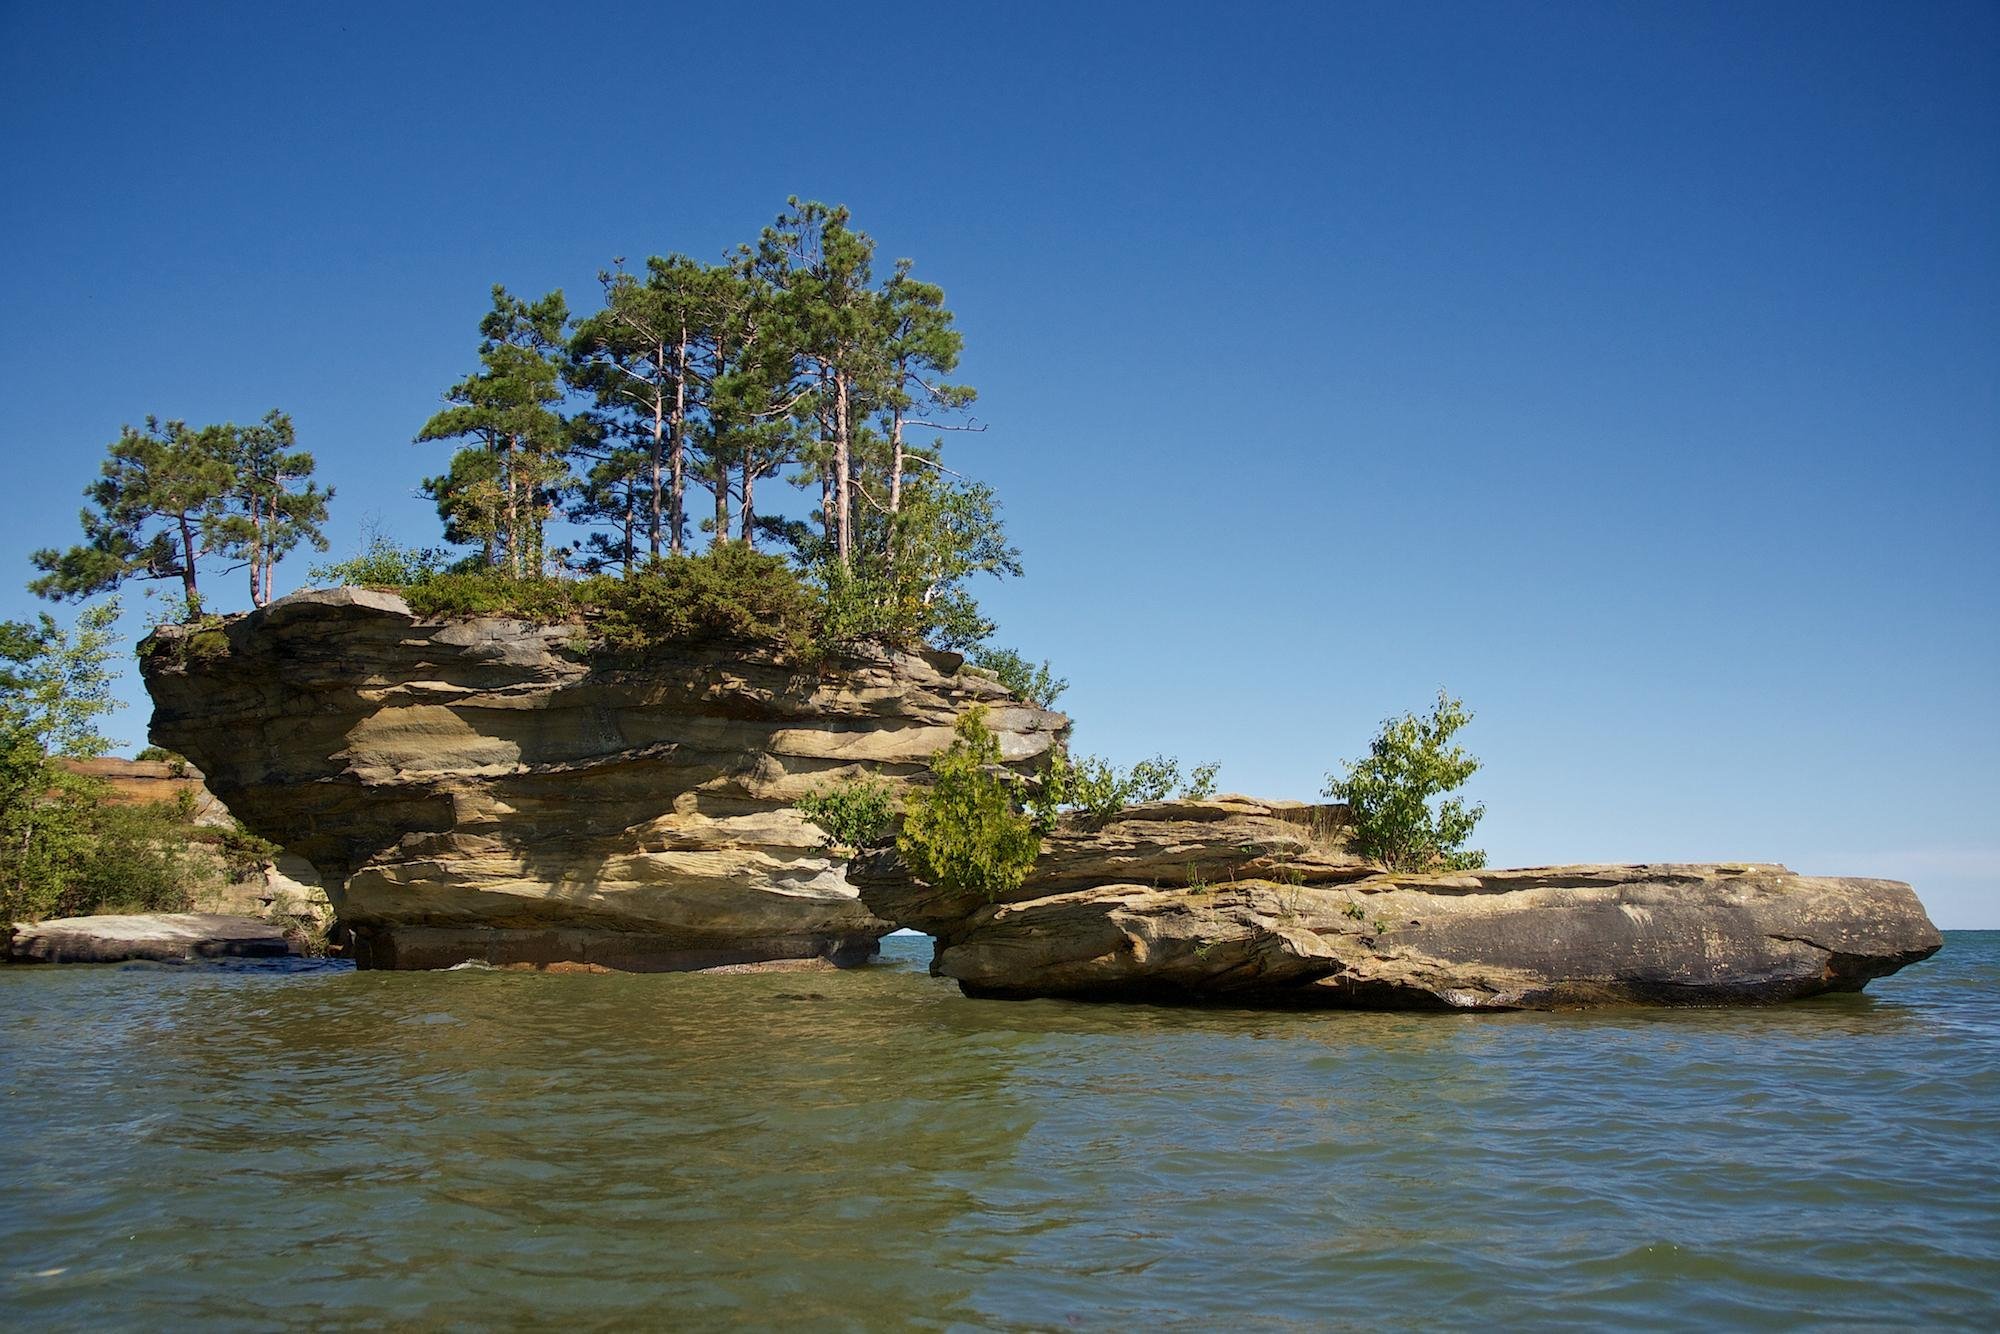 <p>Nature lovers already know the Great Lakes State is filled with wonders. One striking destination for a selfie is Turnip Rock, just off the Lake Huron coast near the village of Port Austin. Kayaking is the best way for most adventurers to make their way to this wondrous land formation and snap a once-in-a-lifetime shot. It sure beats the same old "hot dogs or legs" beach photo.</p>